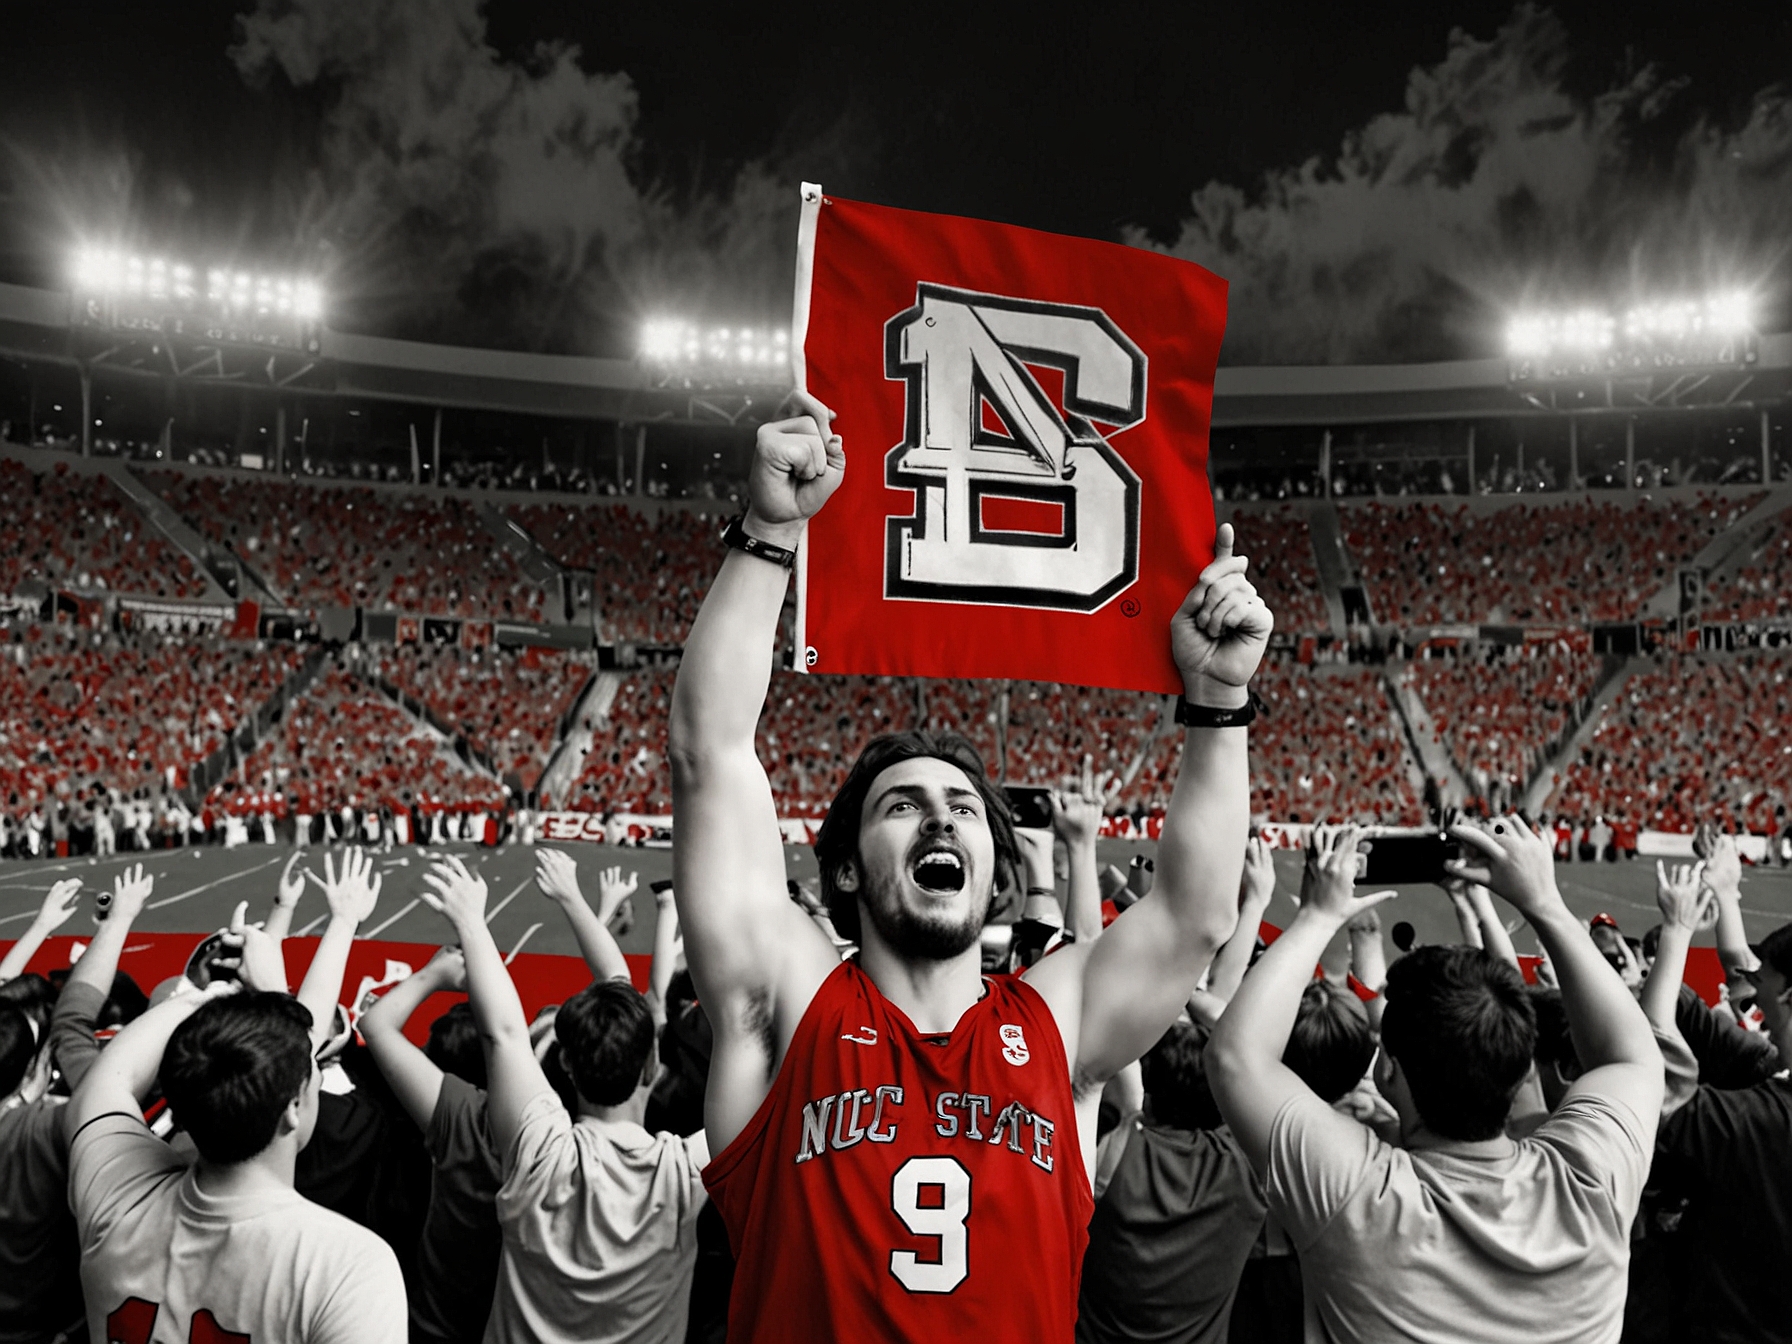 NC State Wolfpack's logo with a background of cheering fans at a sports event.